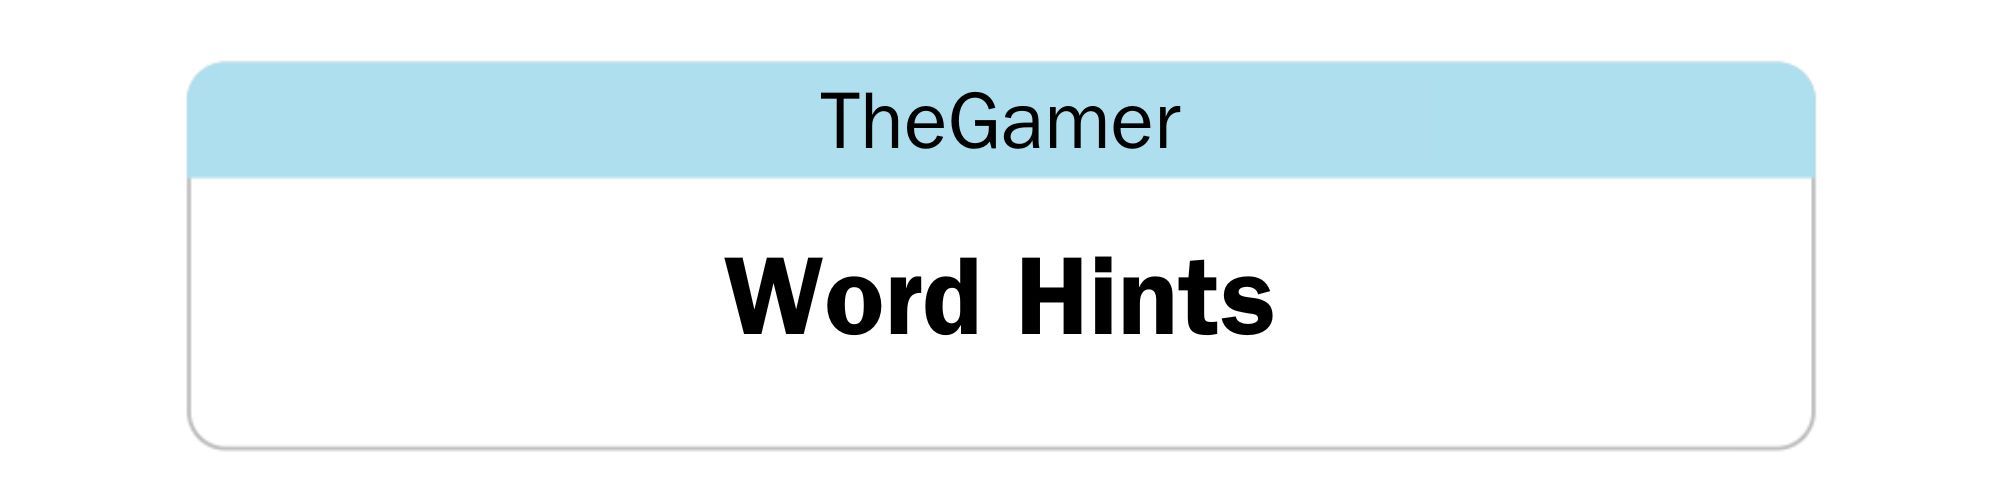 NYT Strands-inspired text box that reads: TheGamer - Today's Theme, Explained